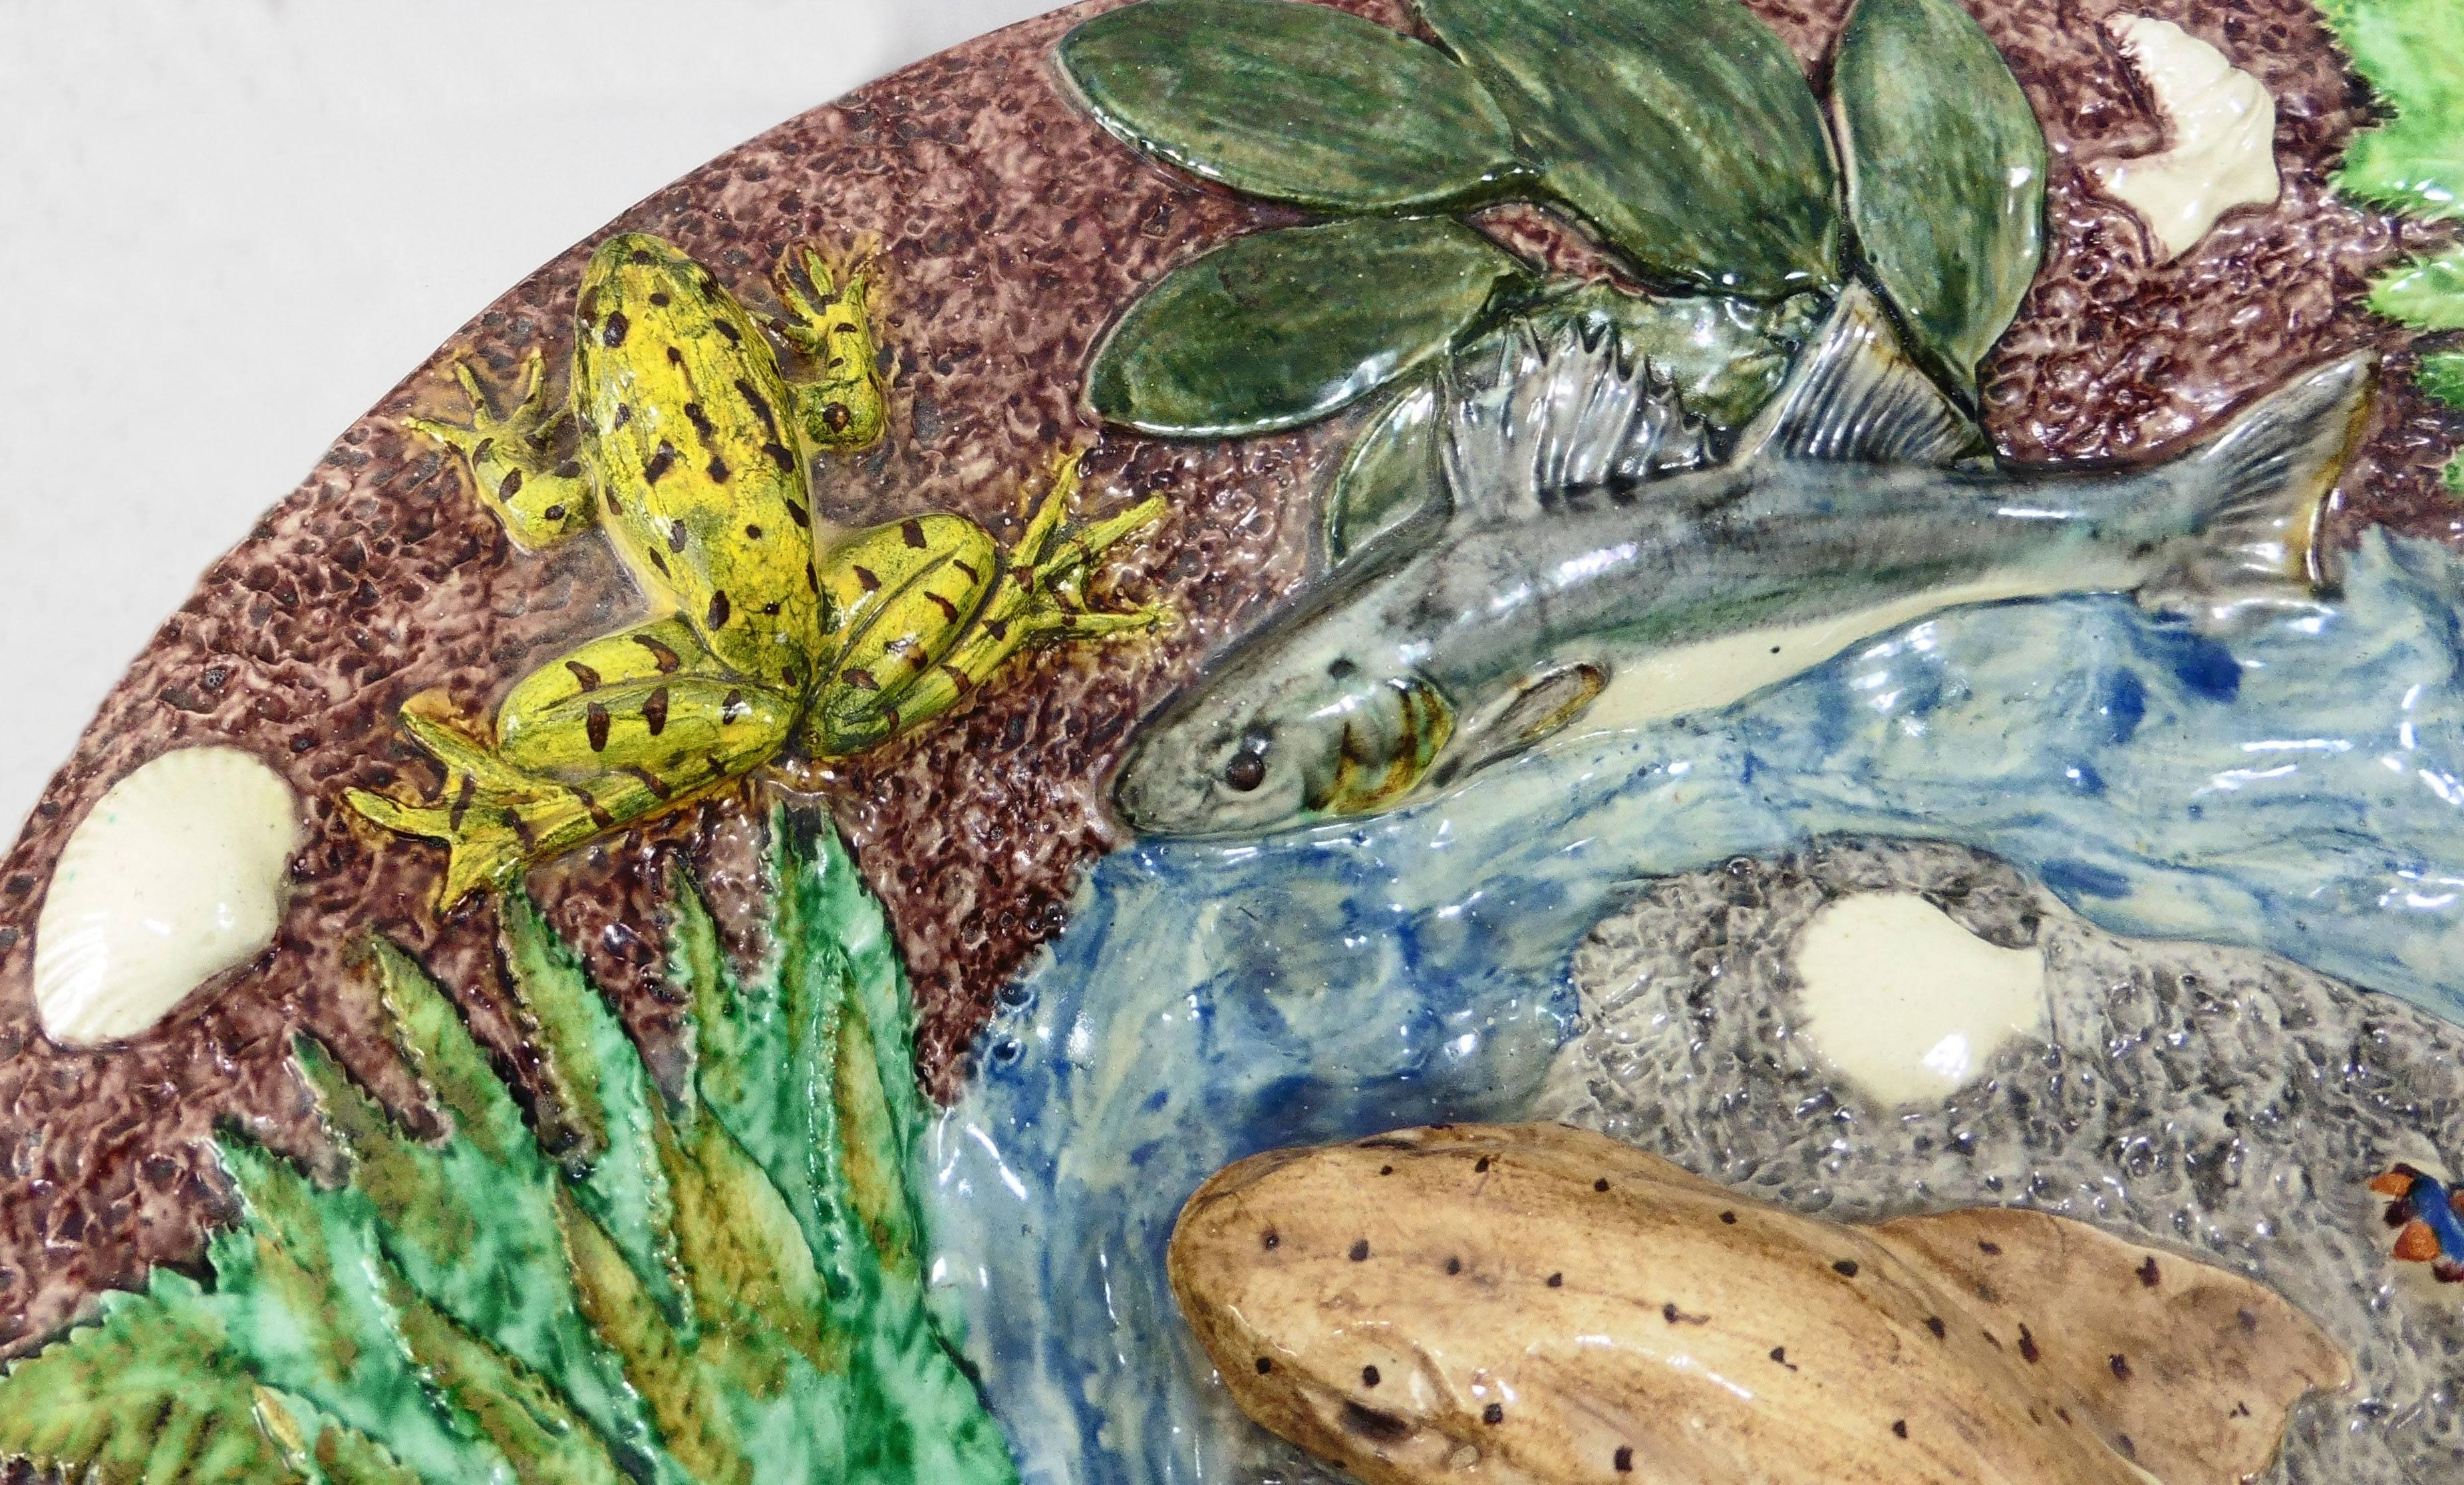 19th century large Palissy wall platter a large catshark on the center surrounded by four fishs, two frogs, two crawfishs, two lizards, shells and different greens plants on a brown background signed Thomas Sergent.
Thomas Victor Sergent was an